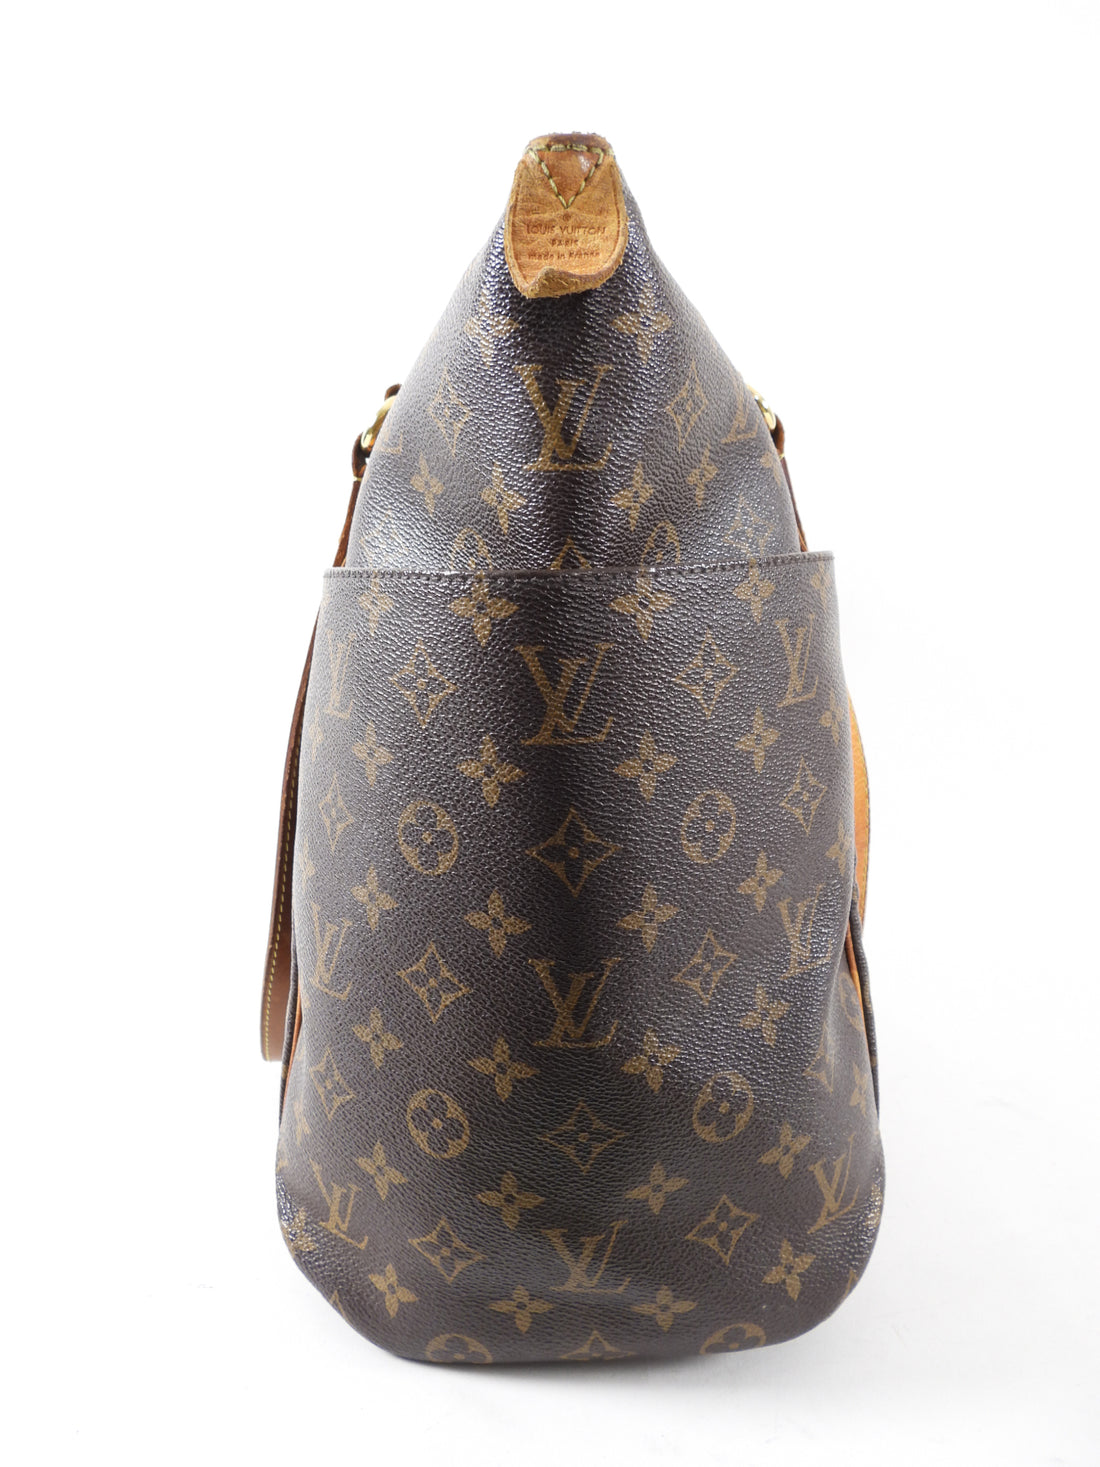 Vintage Louis Vuitton Monogram Totally GM Large Tote Bag Leather